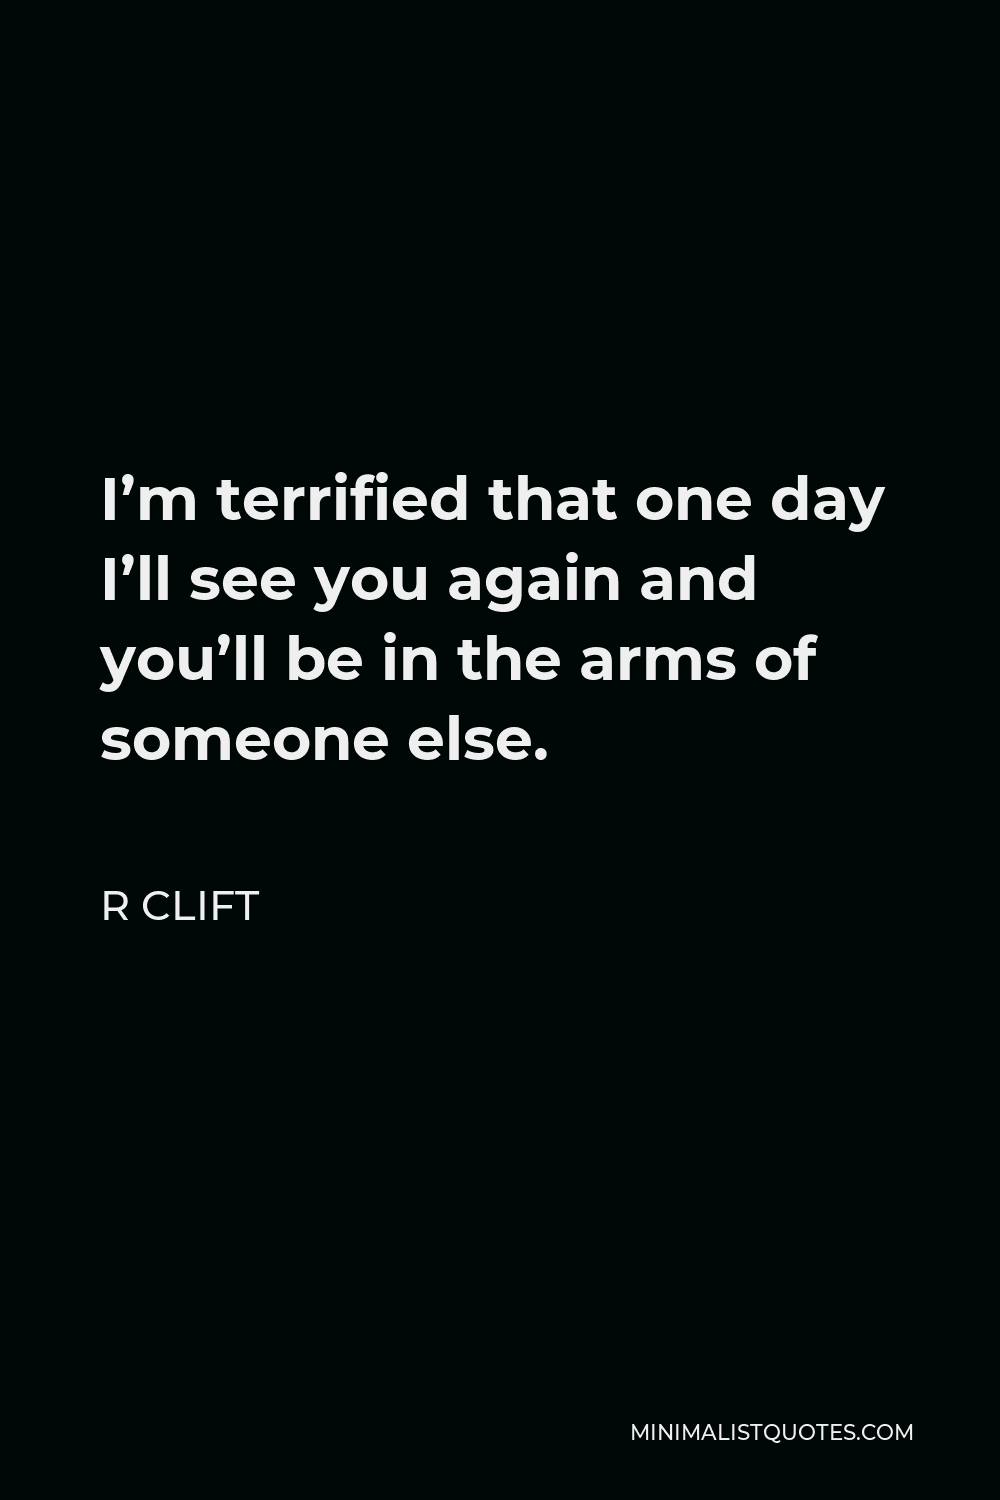 R Clift Quote - I’m terrified that one day I’ll see you again and you’ll be in the arms of someone else.